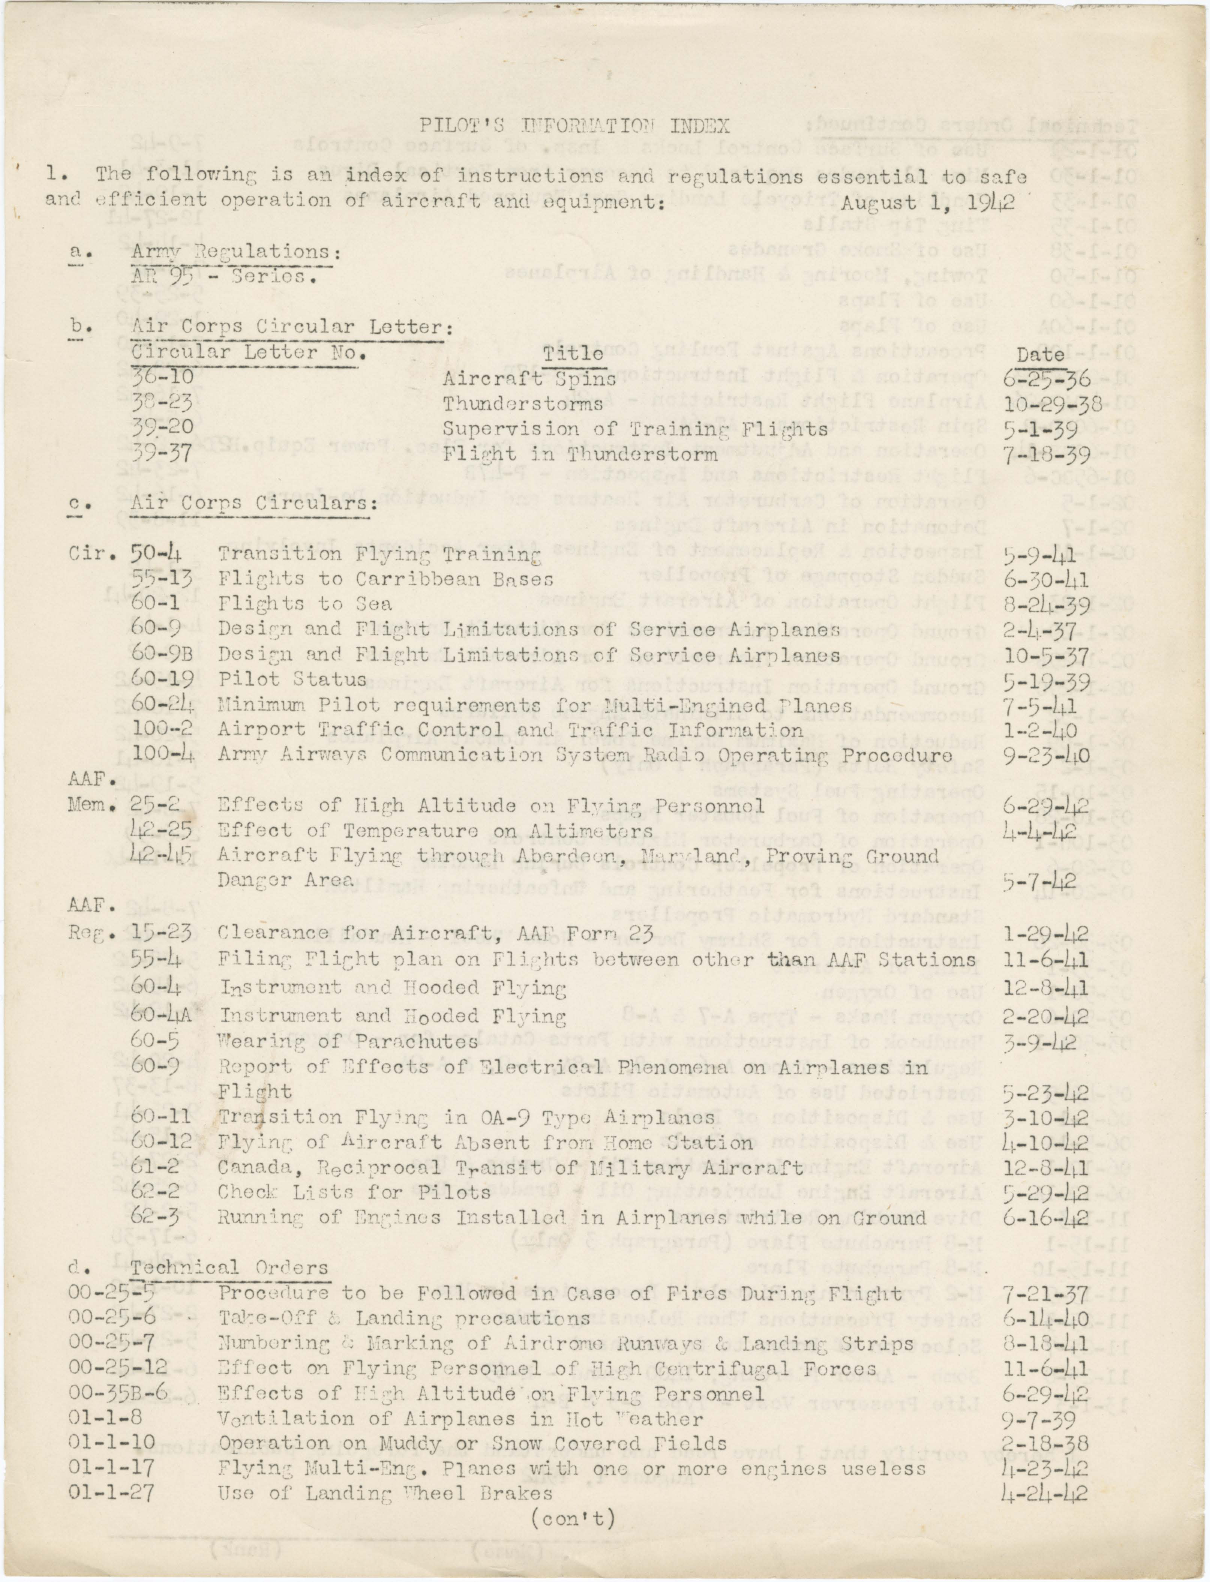 Sample page 1 from AirCorps Library document: Pilot's Information Index